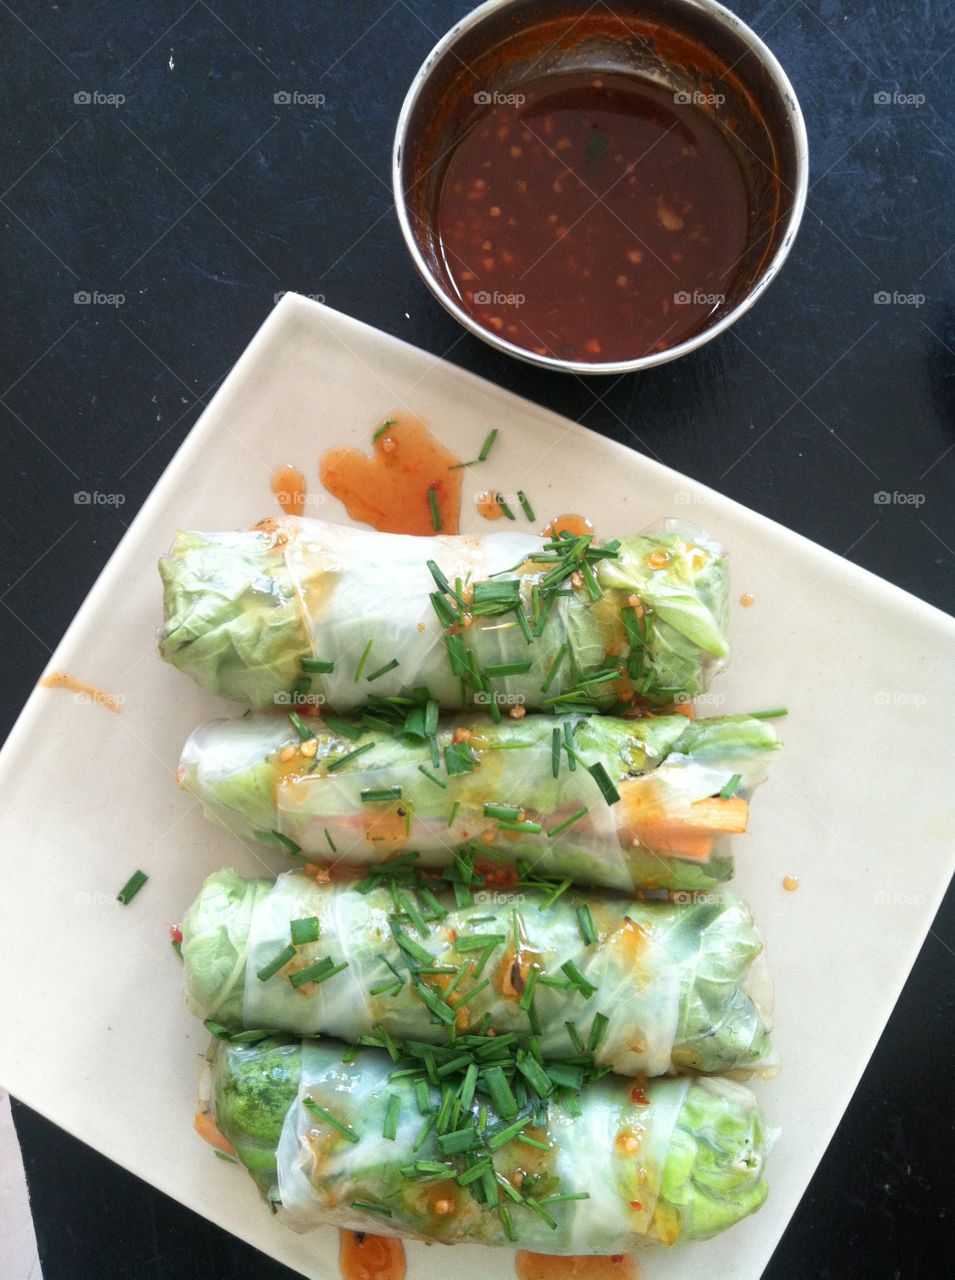 Spring rolls. Fresh spring rolls and dipping sauce